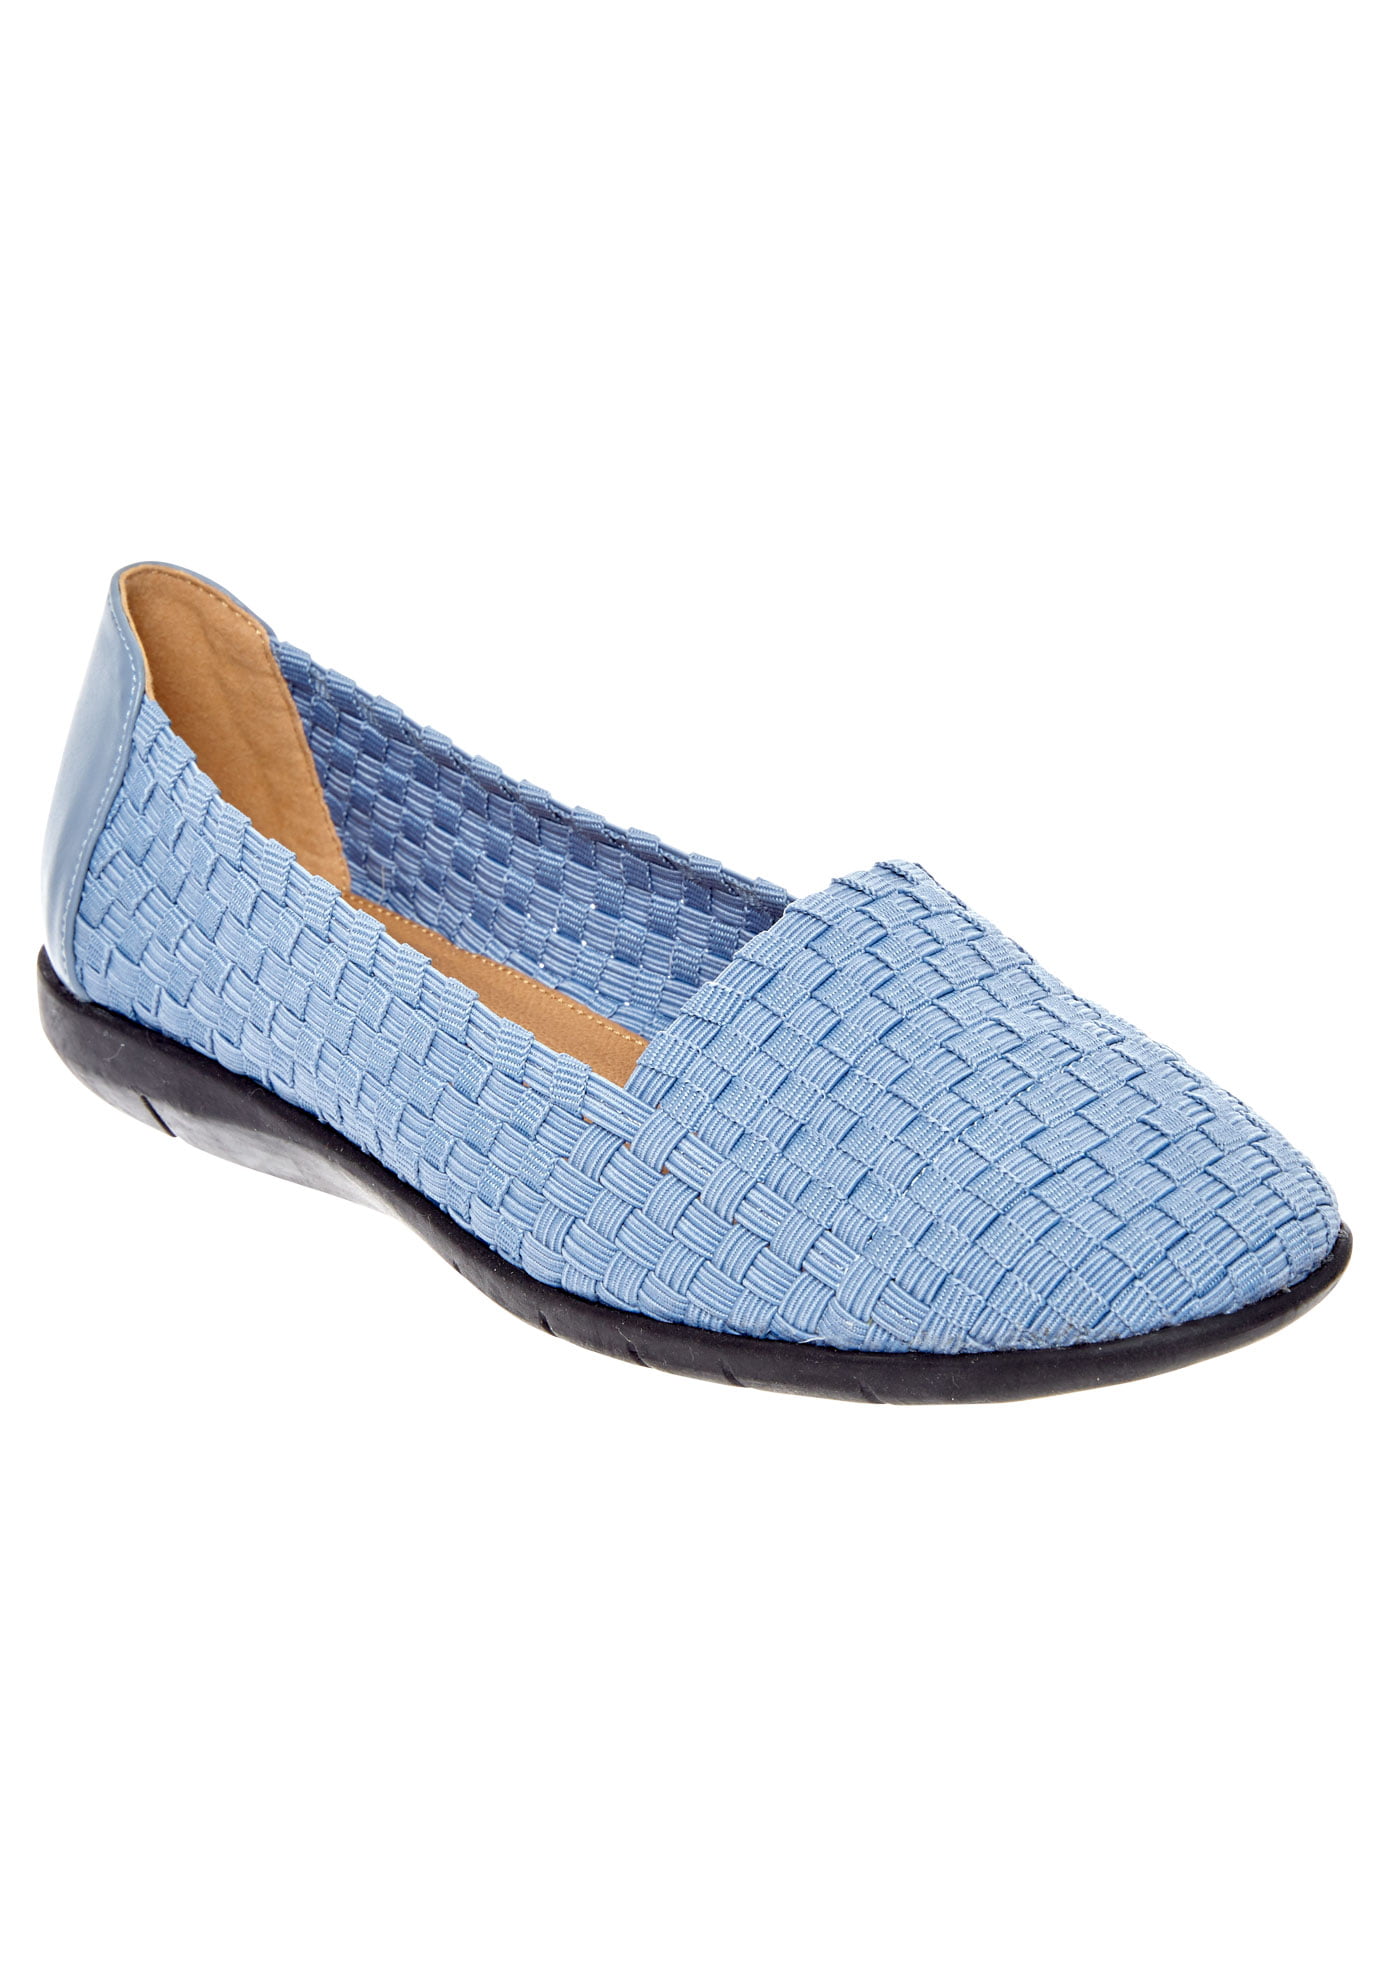 Comfortview Comfortview Women S Wide Width The Bethany Flat Shoes